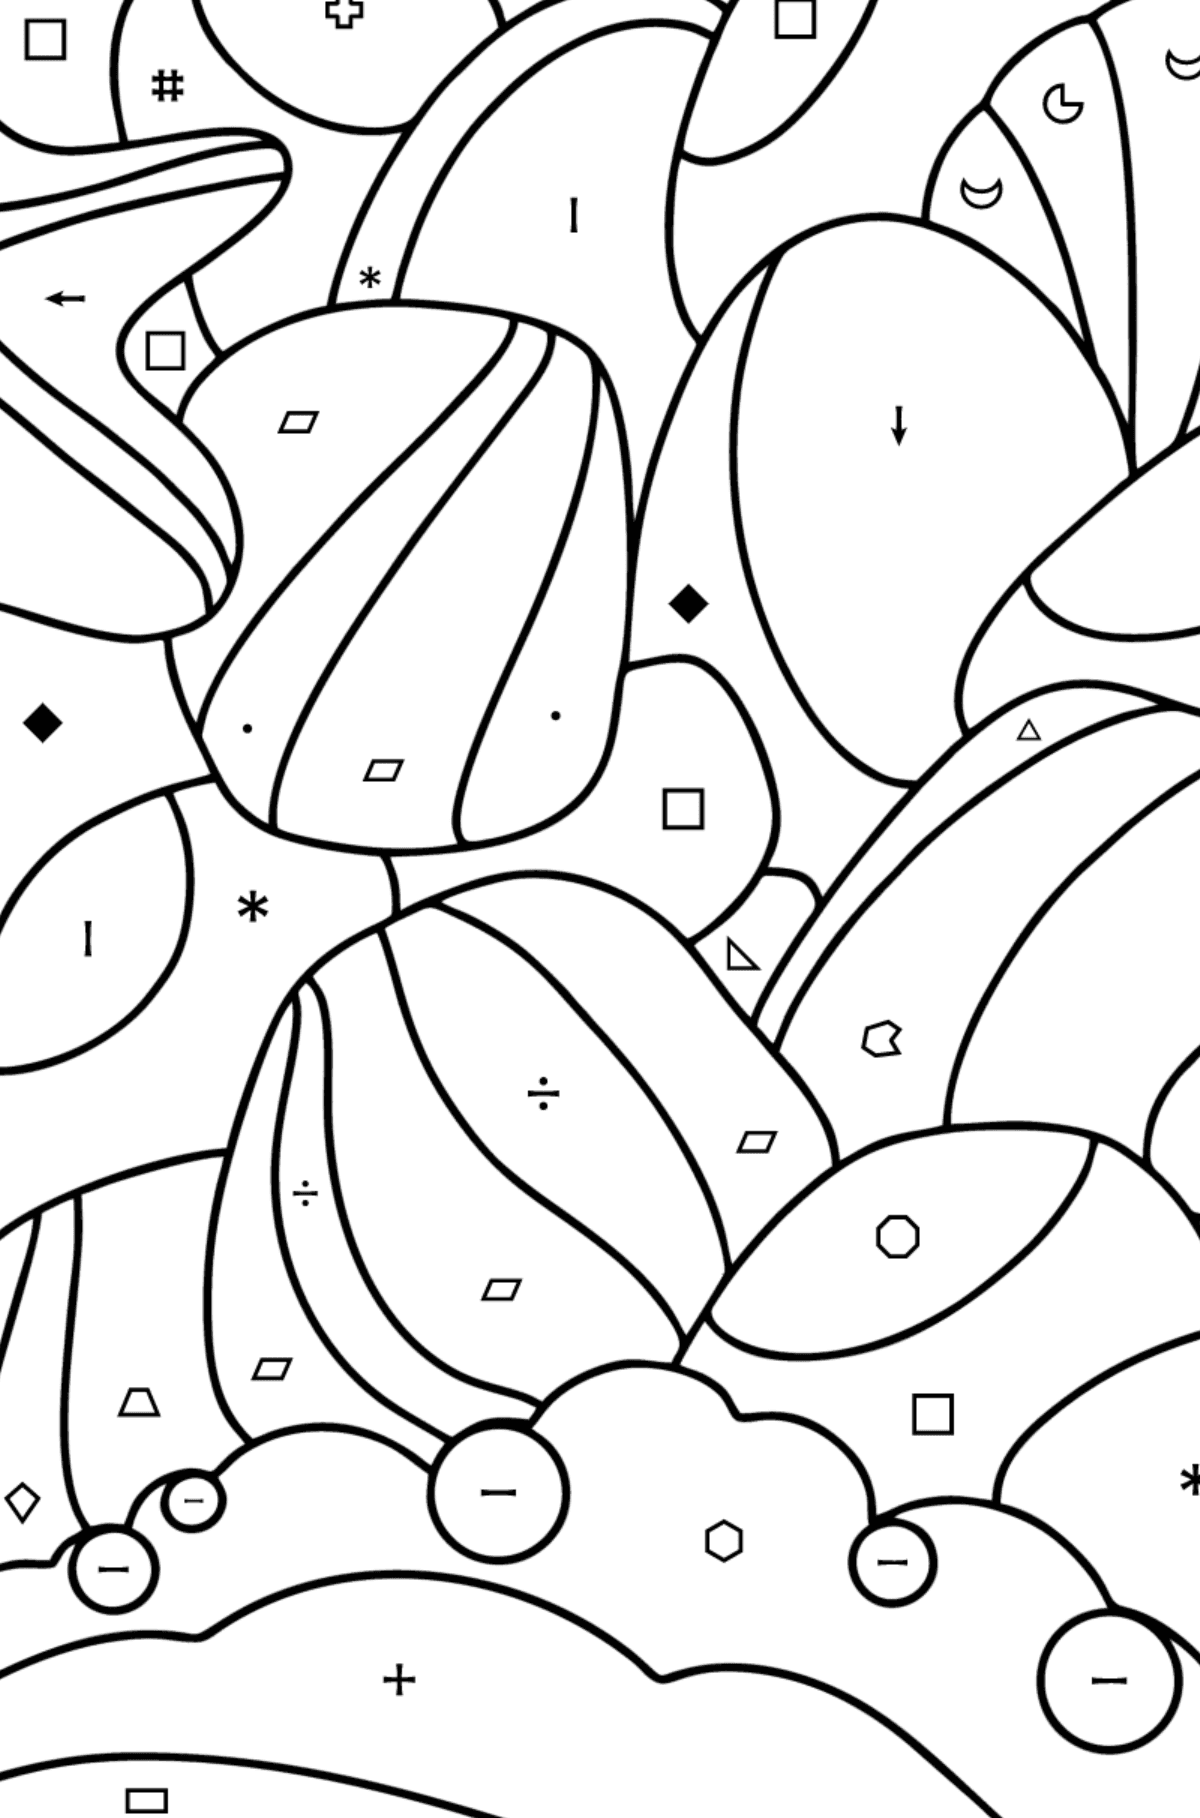 Doodle Coloring Page for Kids - Sea Pebbles - Coloring by Symbols and Geometric Shapes for Kids